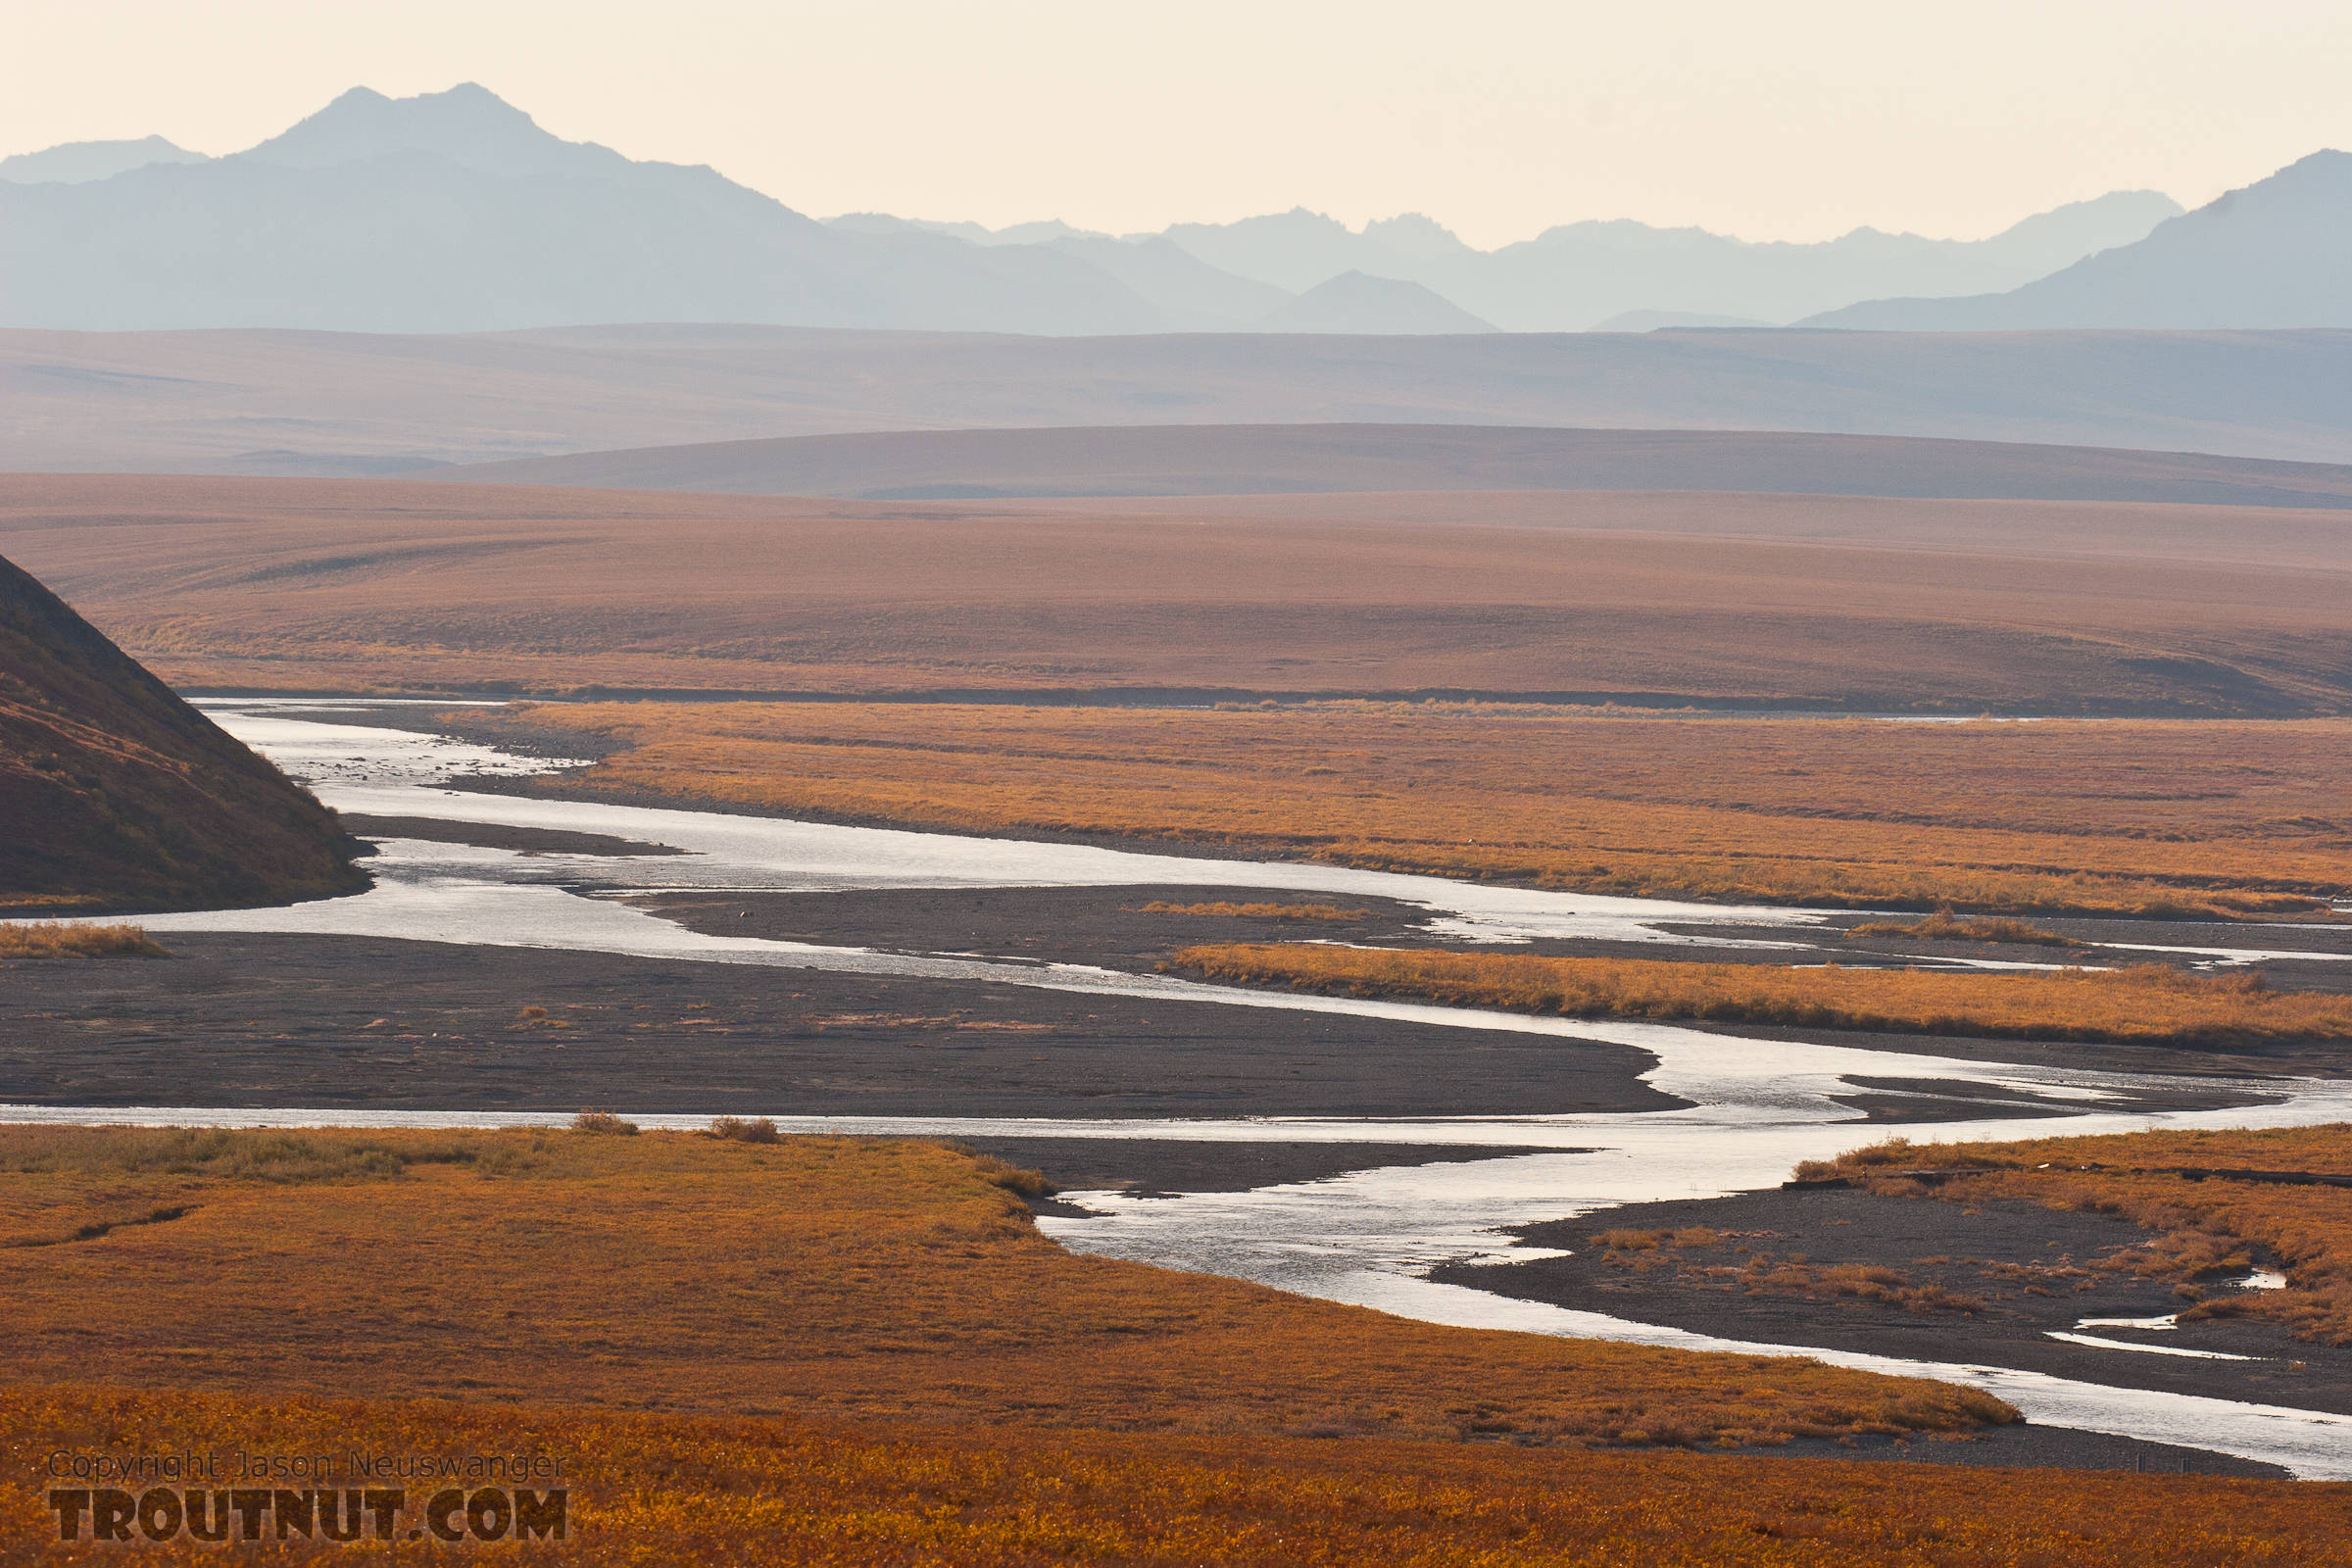 A beautiful braided reach of the Sag River, with the Philip Smith Mountains in the Arctic National Wildlife Refuge (ANWR) in the background. From the Sagavanirktok River in Alaska.